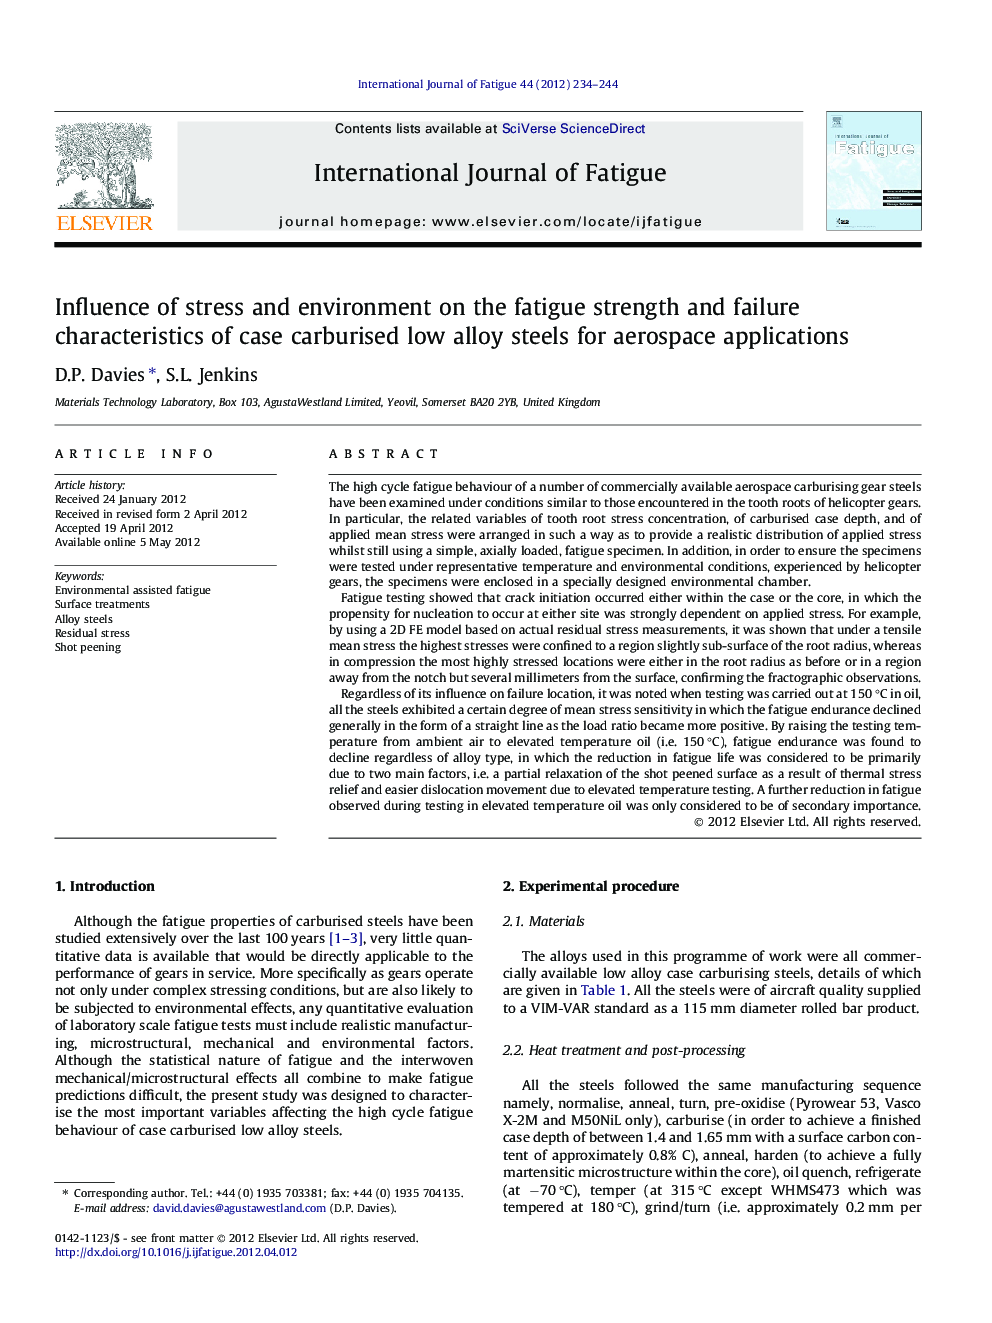 Influence of stress and environment on the fatigue strength and failure characteristics of case carburised low alloy steels for aerospace applications